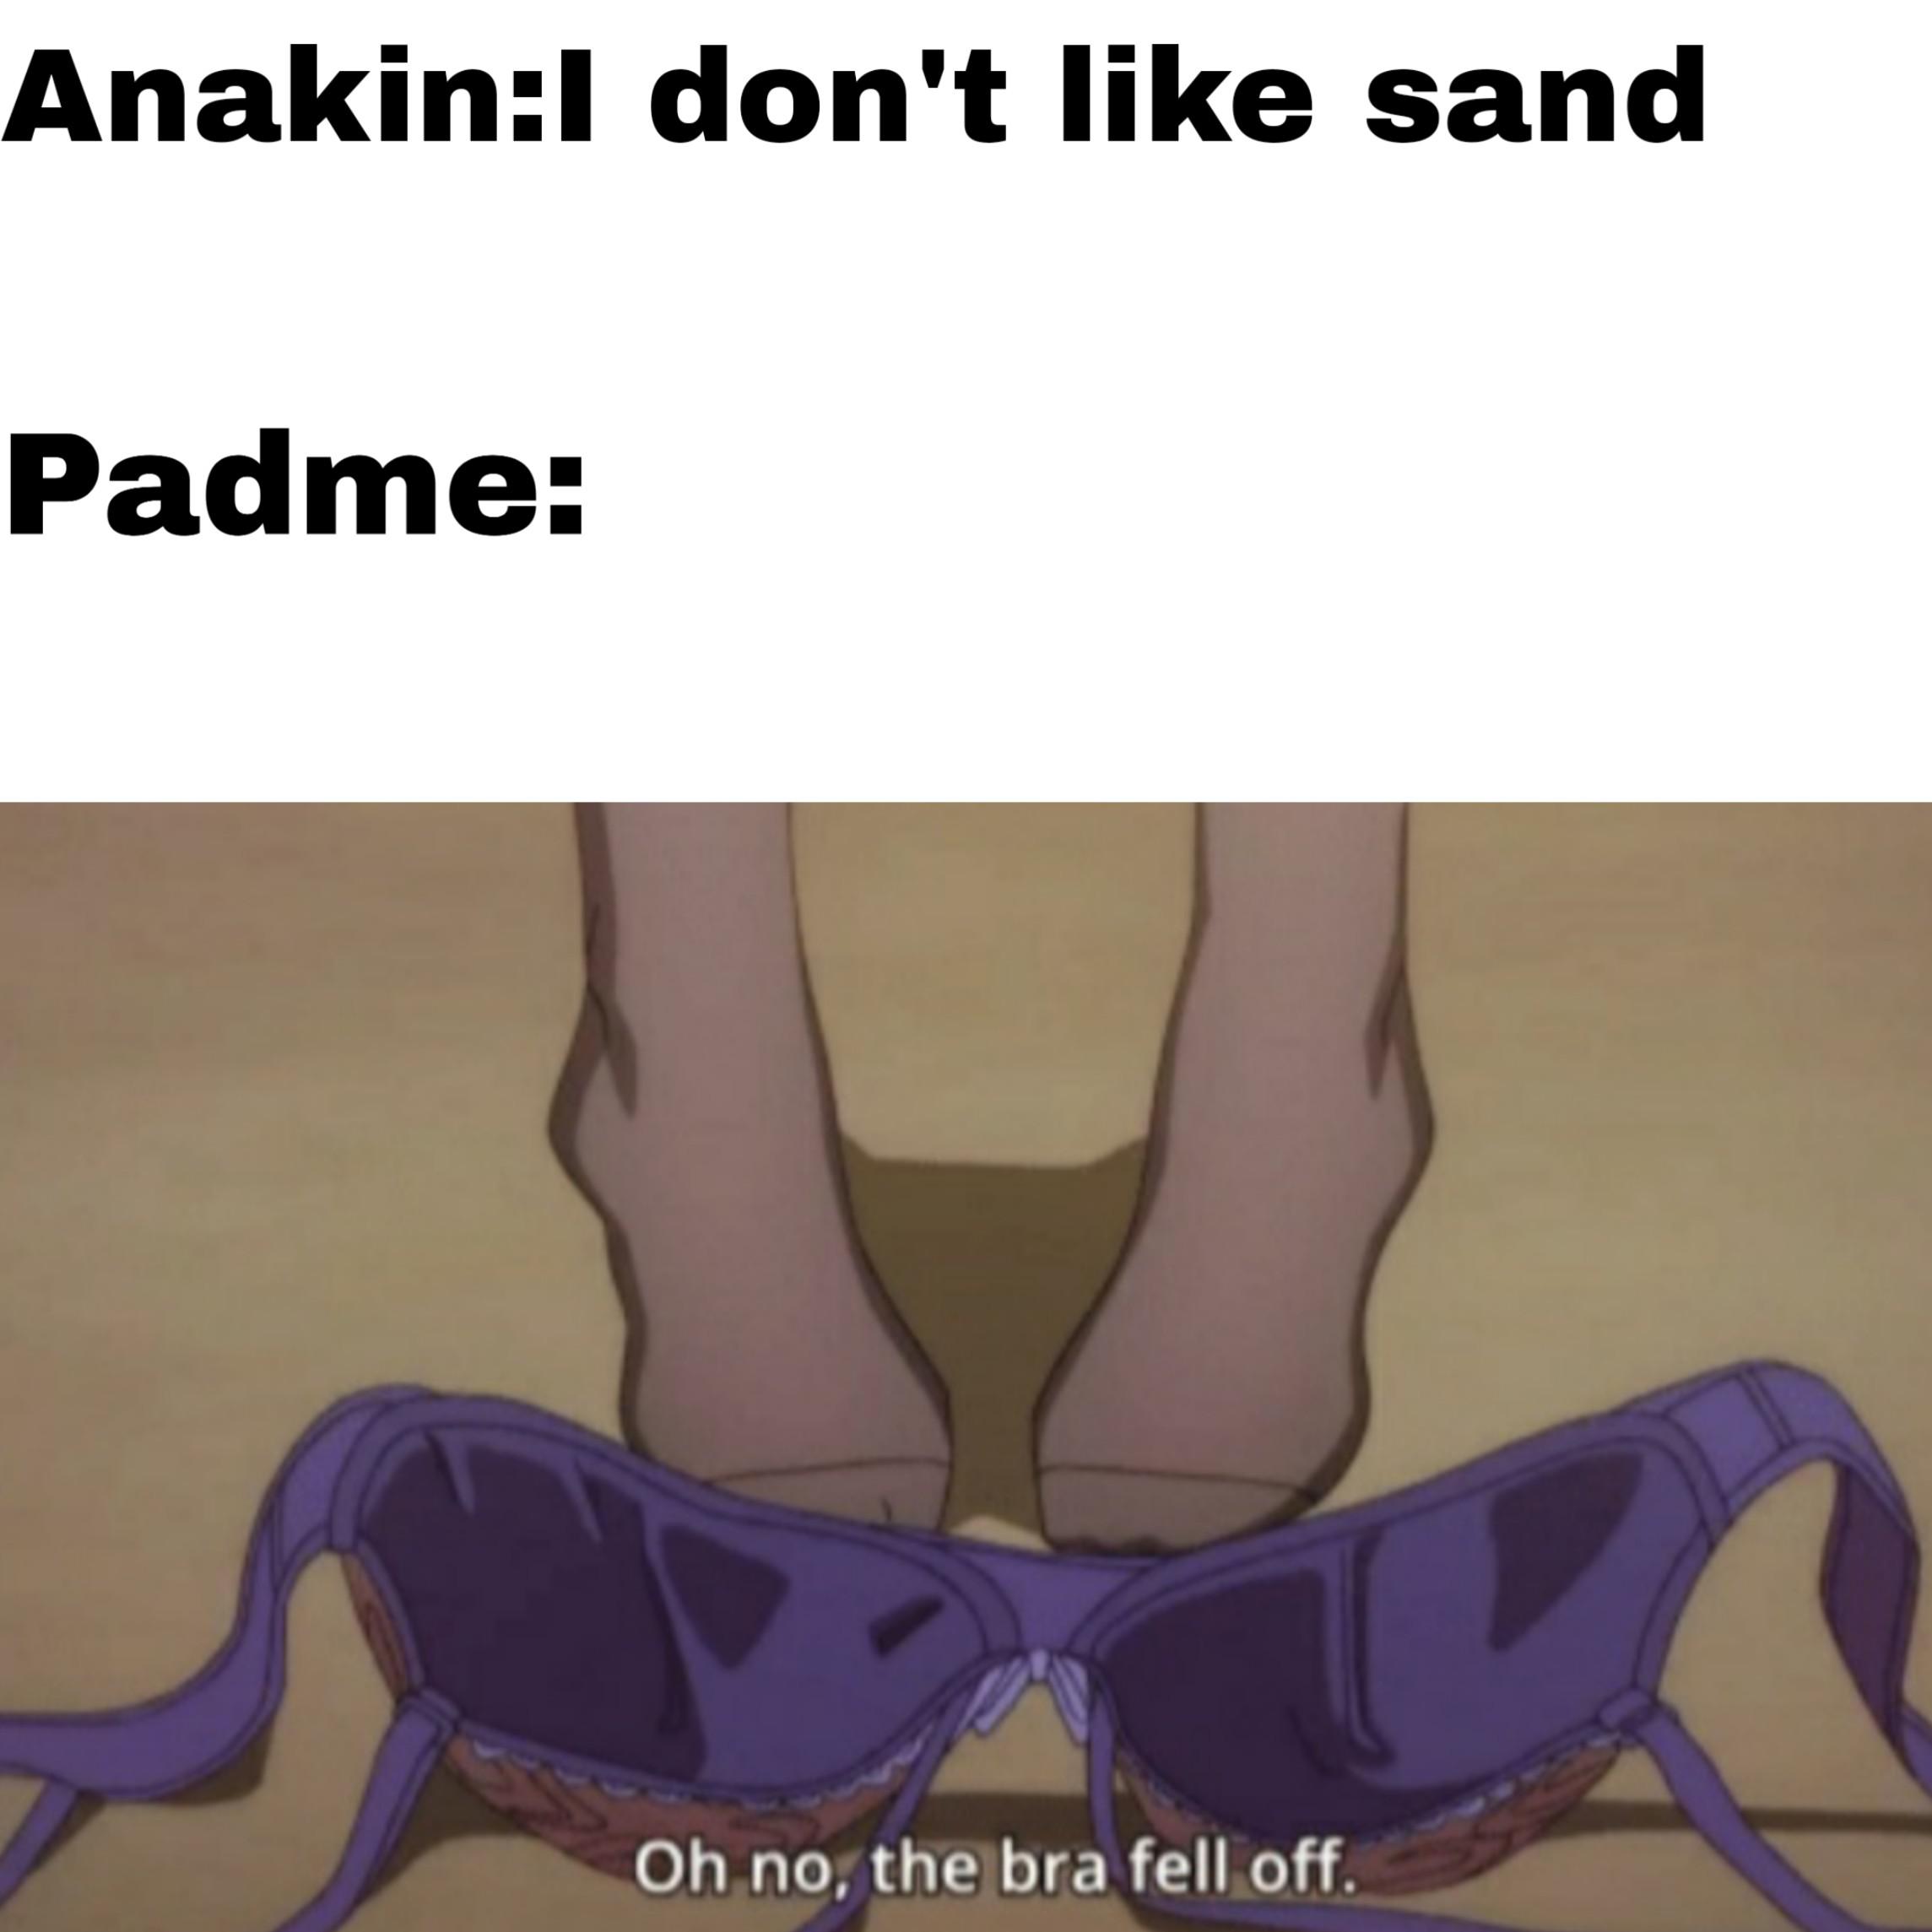 Prequel-memes, Anakin, TurRM, Thibson3, Cake Day, Anakinfucks Star Wars Memes Prequel-memes, Anakin, TurRM, Thibson3, Cake Day, Anakinfucks text: Anakin:l don't like sand Padme: Oh no; the bra fell off. 